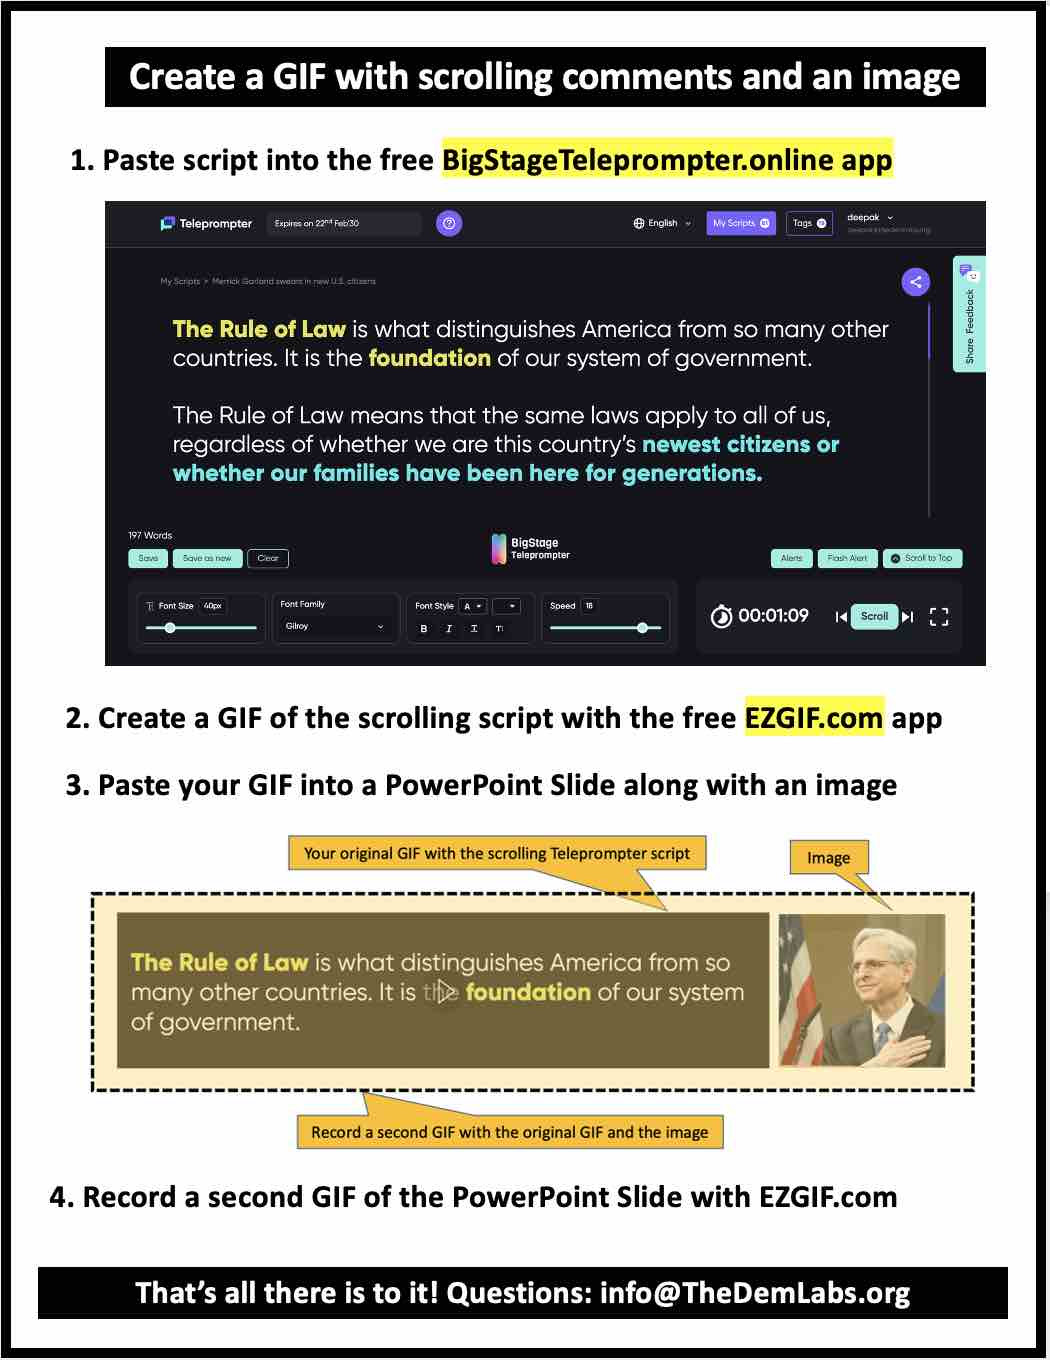 How to create a GIF with a scrolling script and a photo using the free BigStageTeleprompter and EZGIF apps